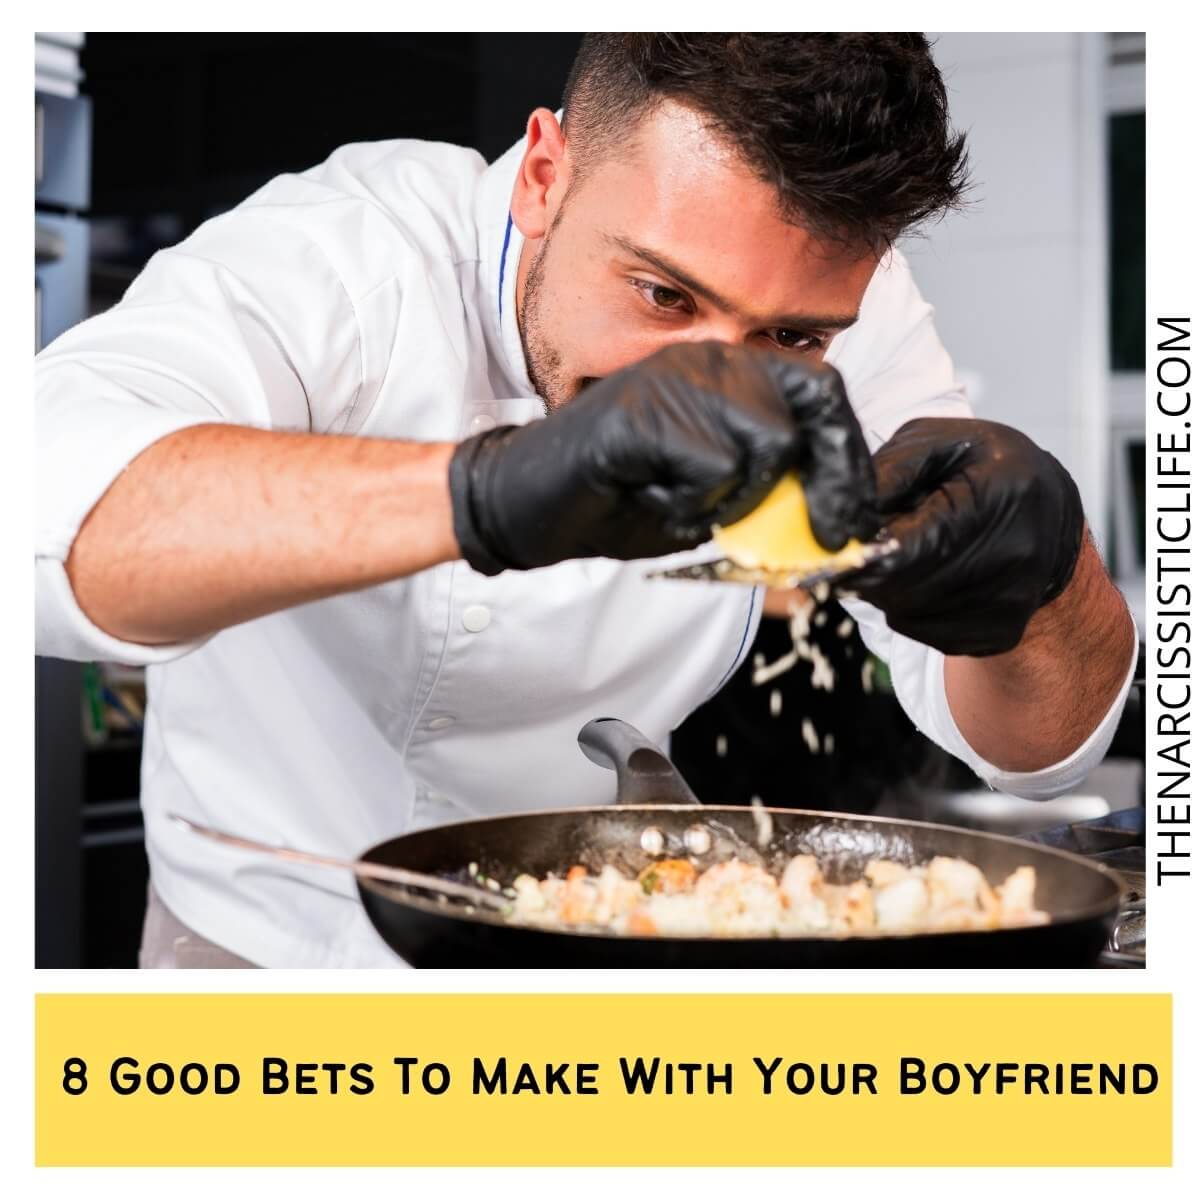 31 Bets to Make With Your Boyfriend image